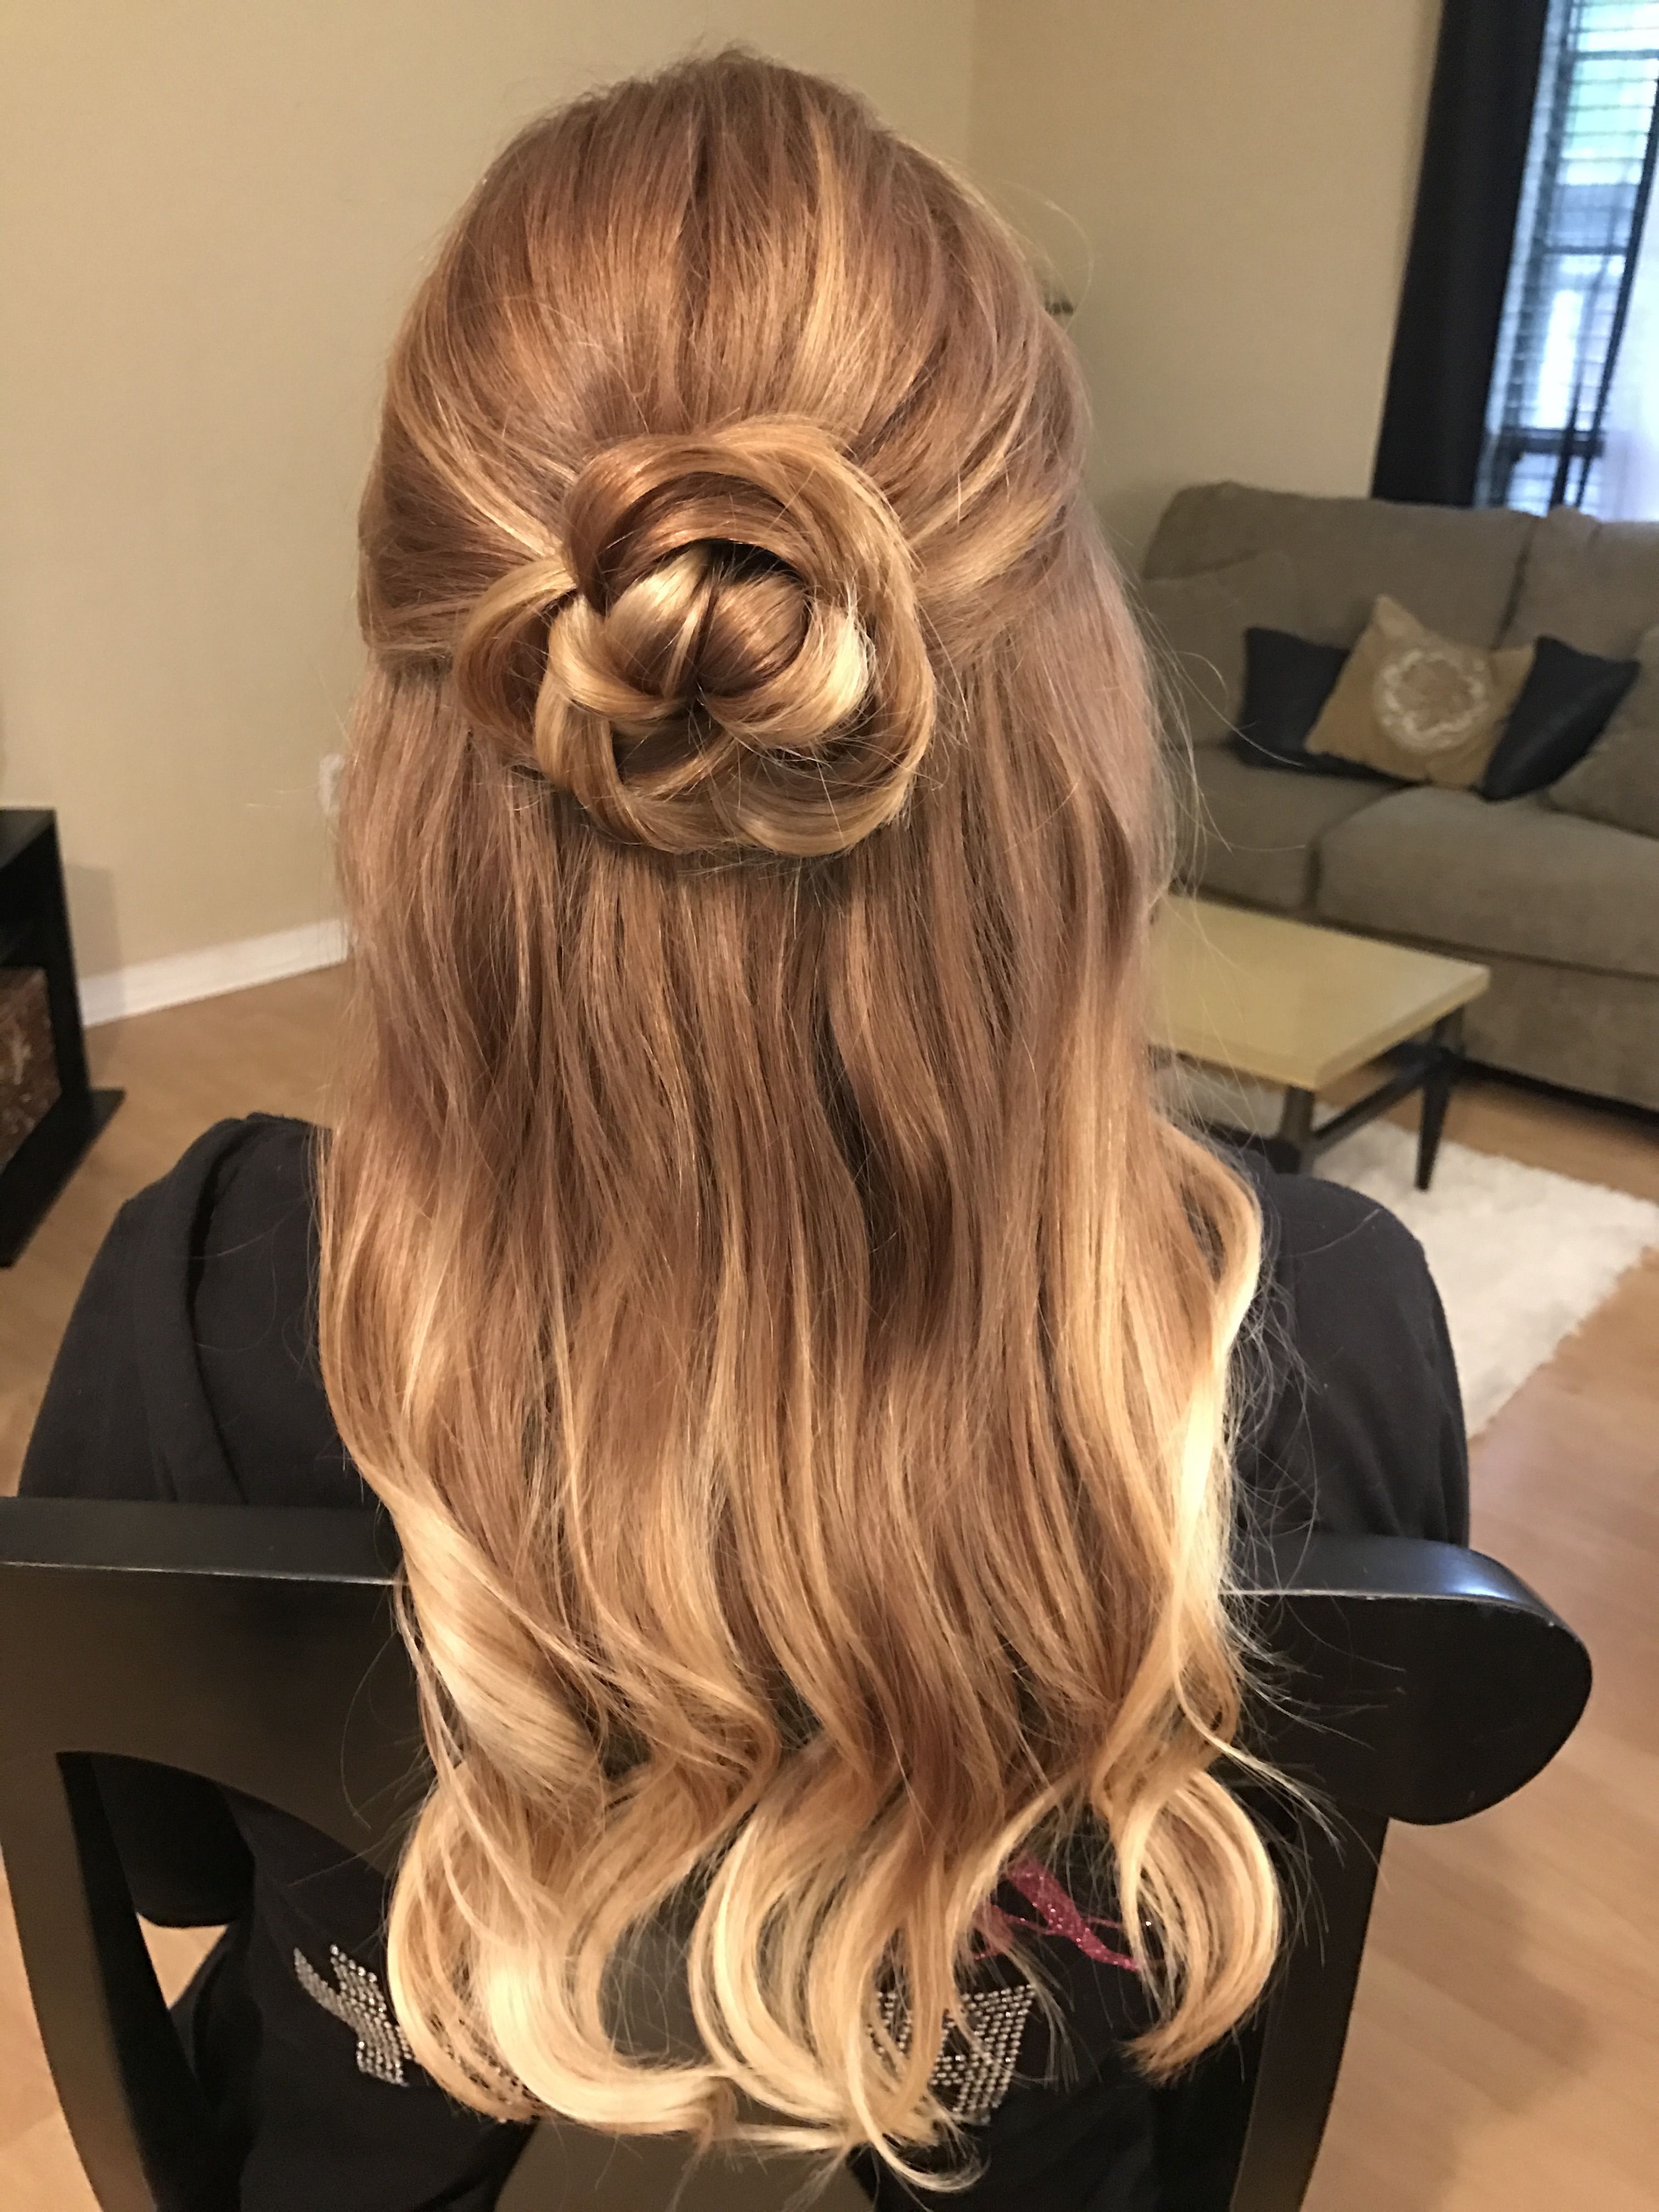 Most Recently Released Rosette Curls Prom Hairstyles Intended For Rose Flower Hair Updo Half Up Half Down Hairstyle For Prom Bride Or (View 15 of 20)